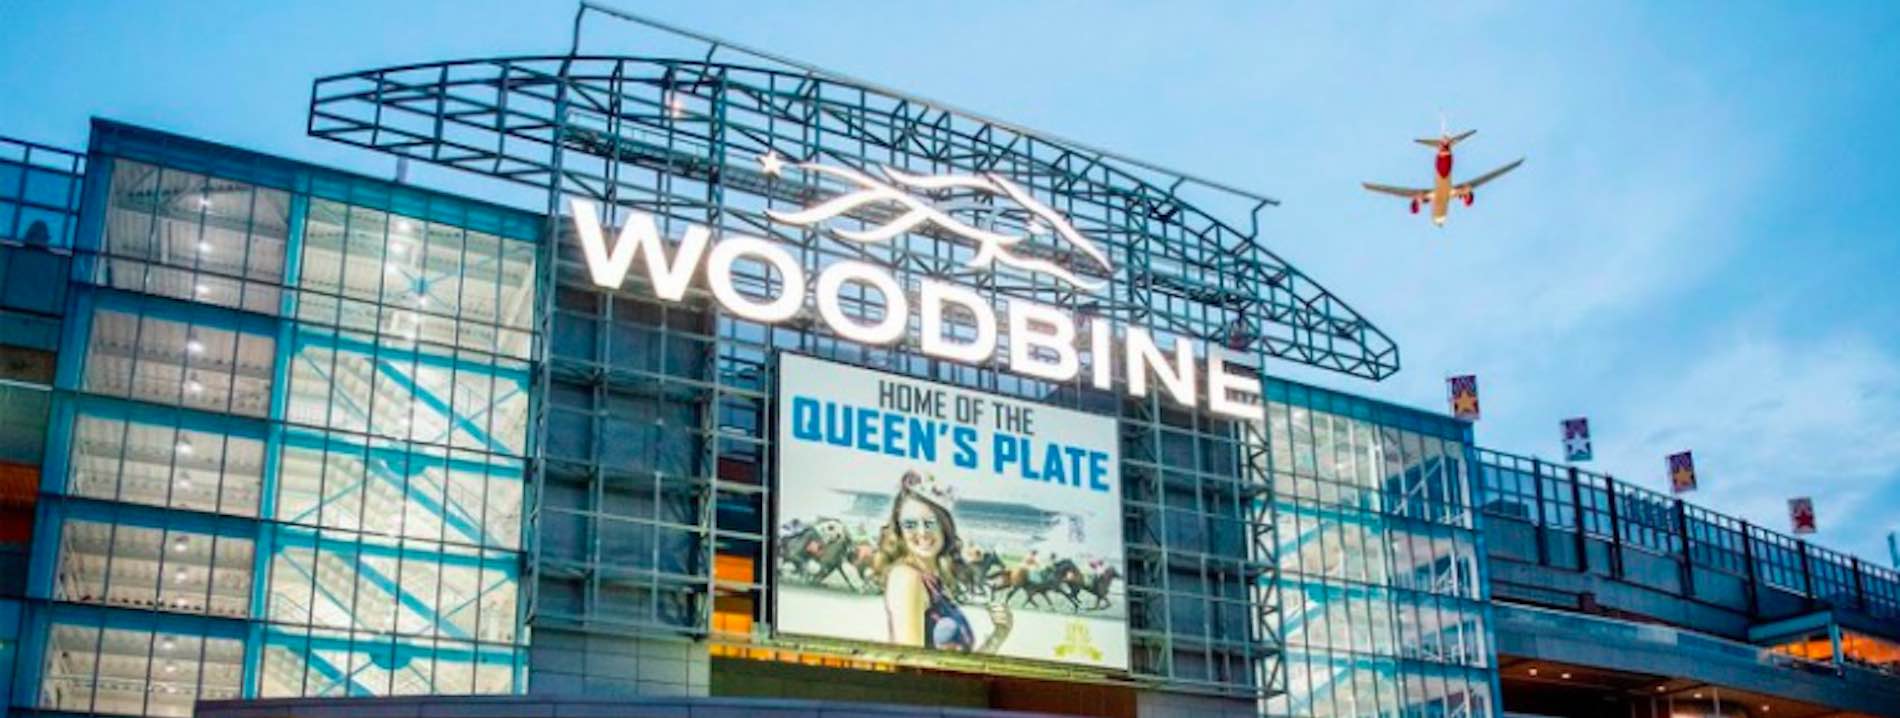 Woodbine Casino Owned by Great Canadian Gaming